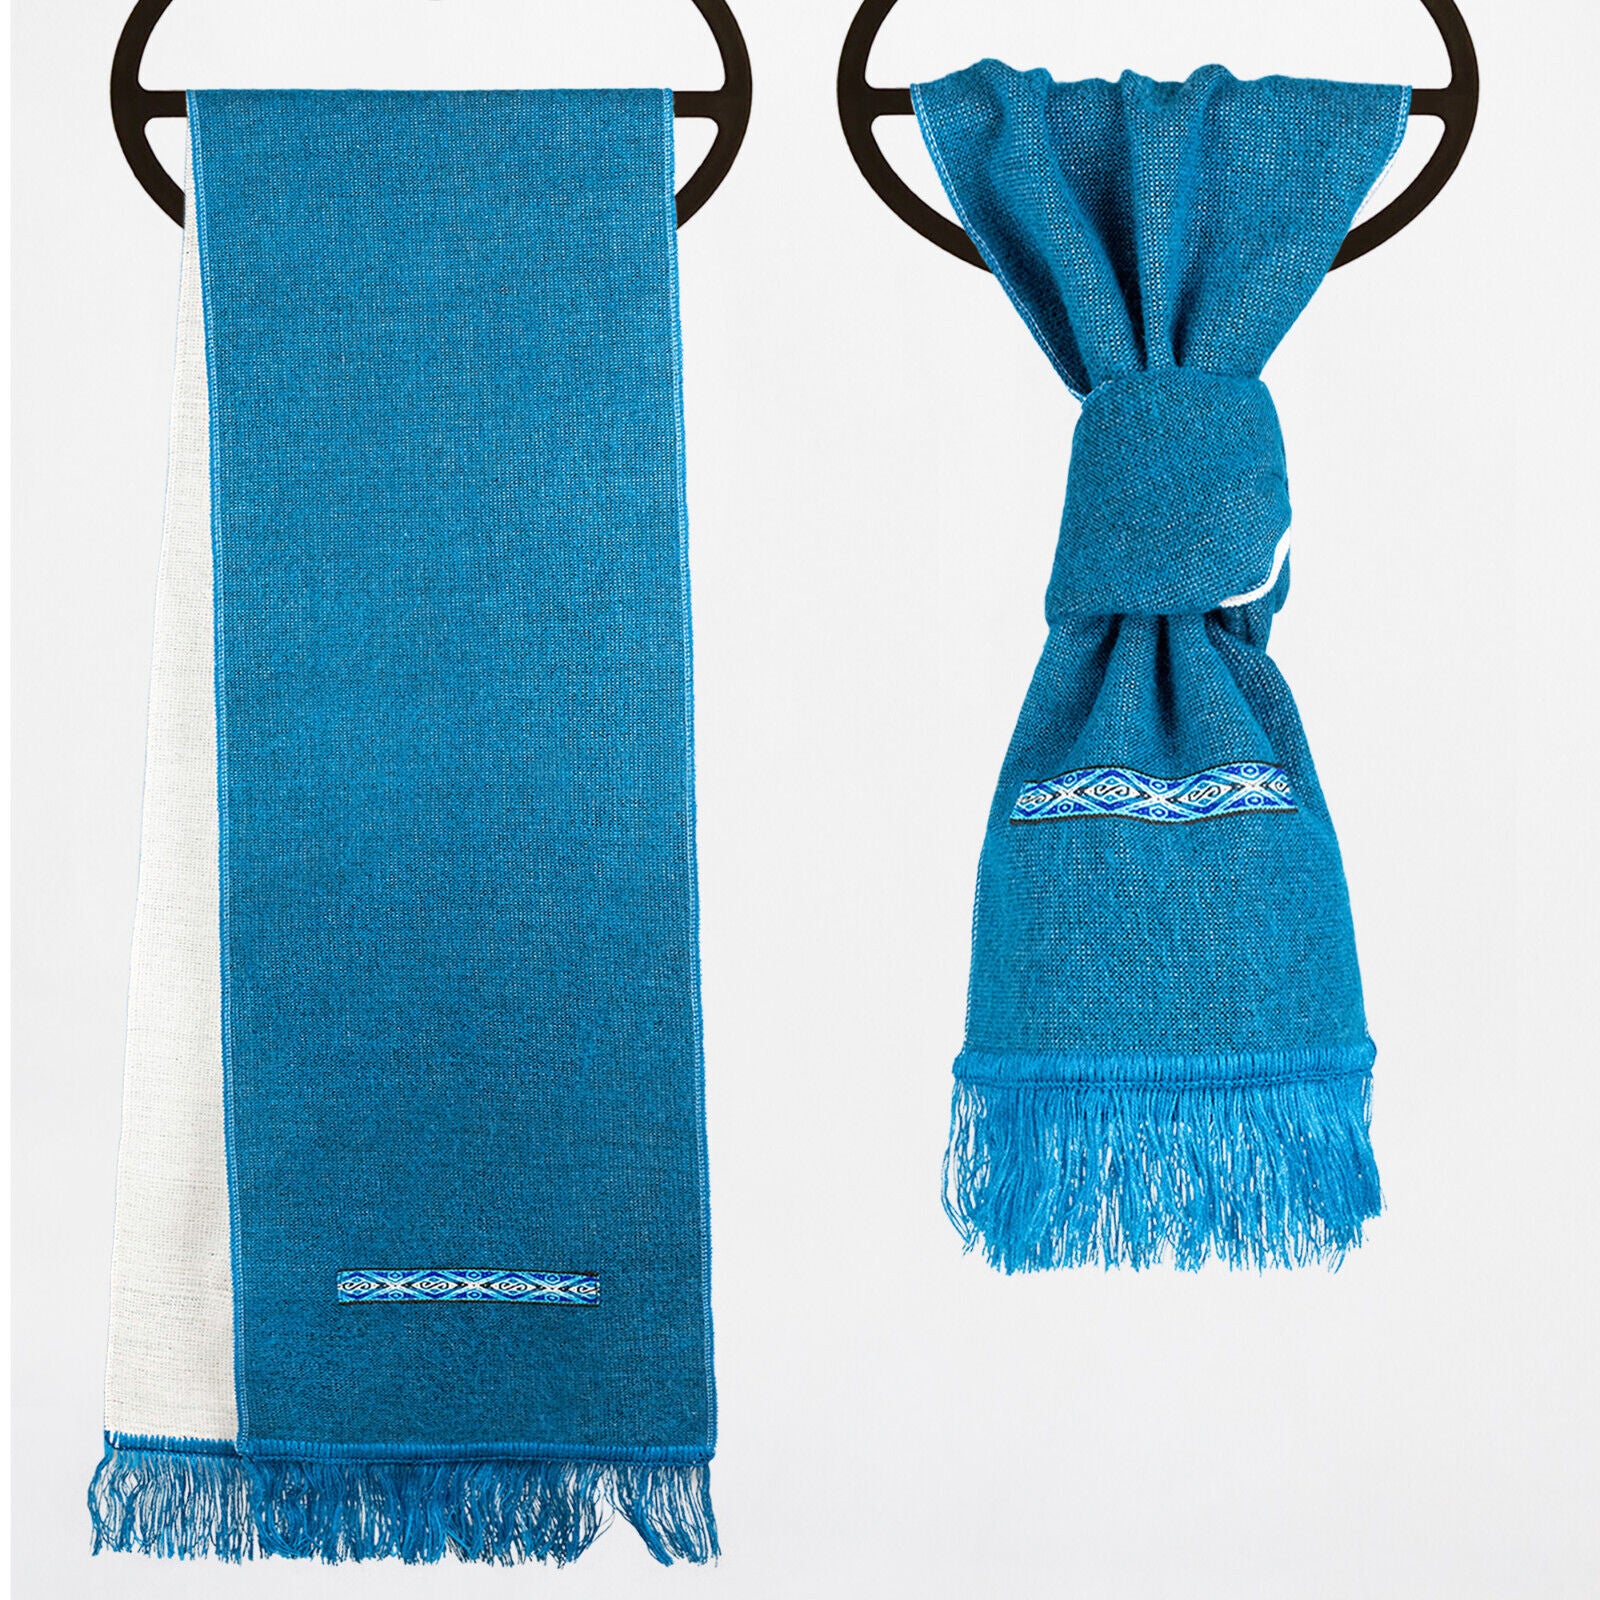 Alpaca Wool Scarves - Dual-Tone, Brushed Finish, Embroidery - Andean Elegance